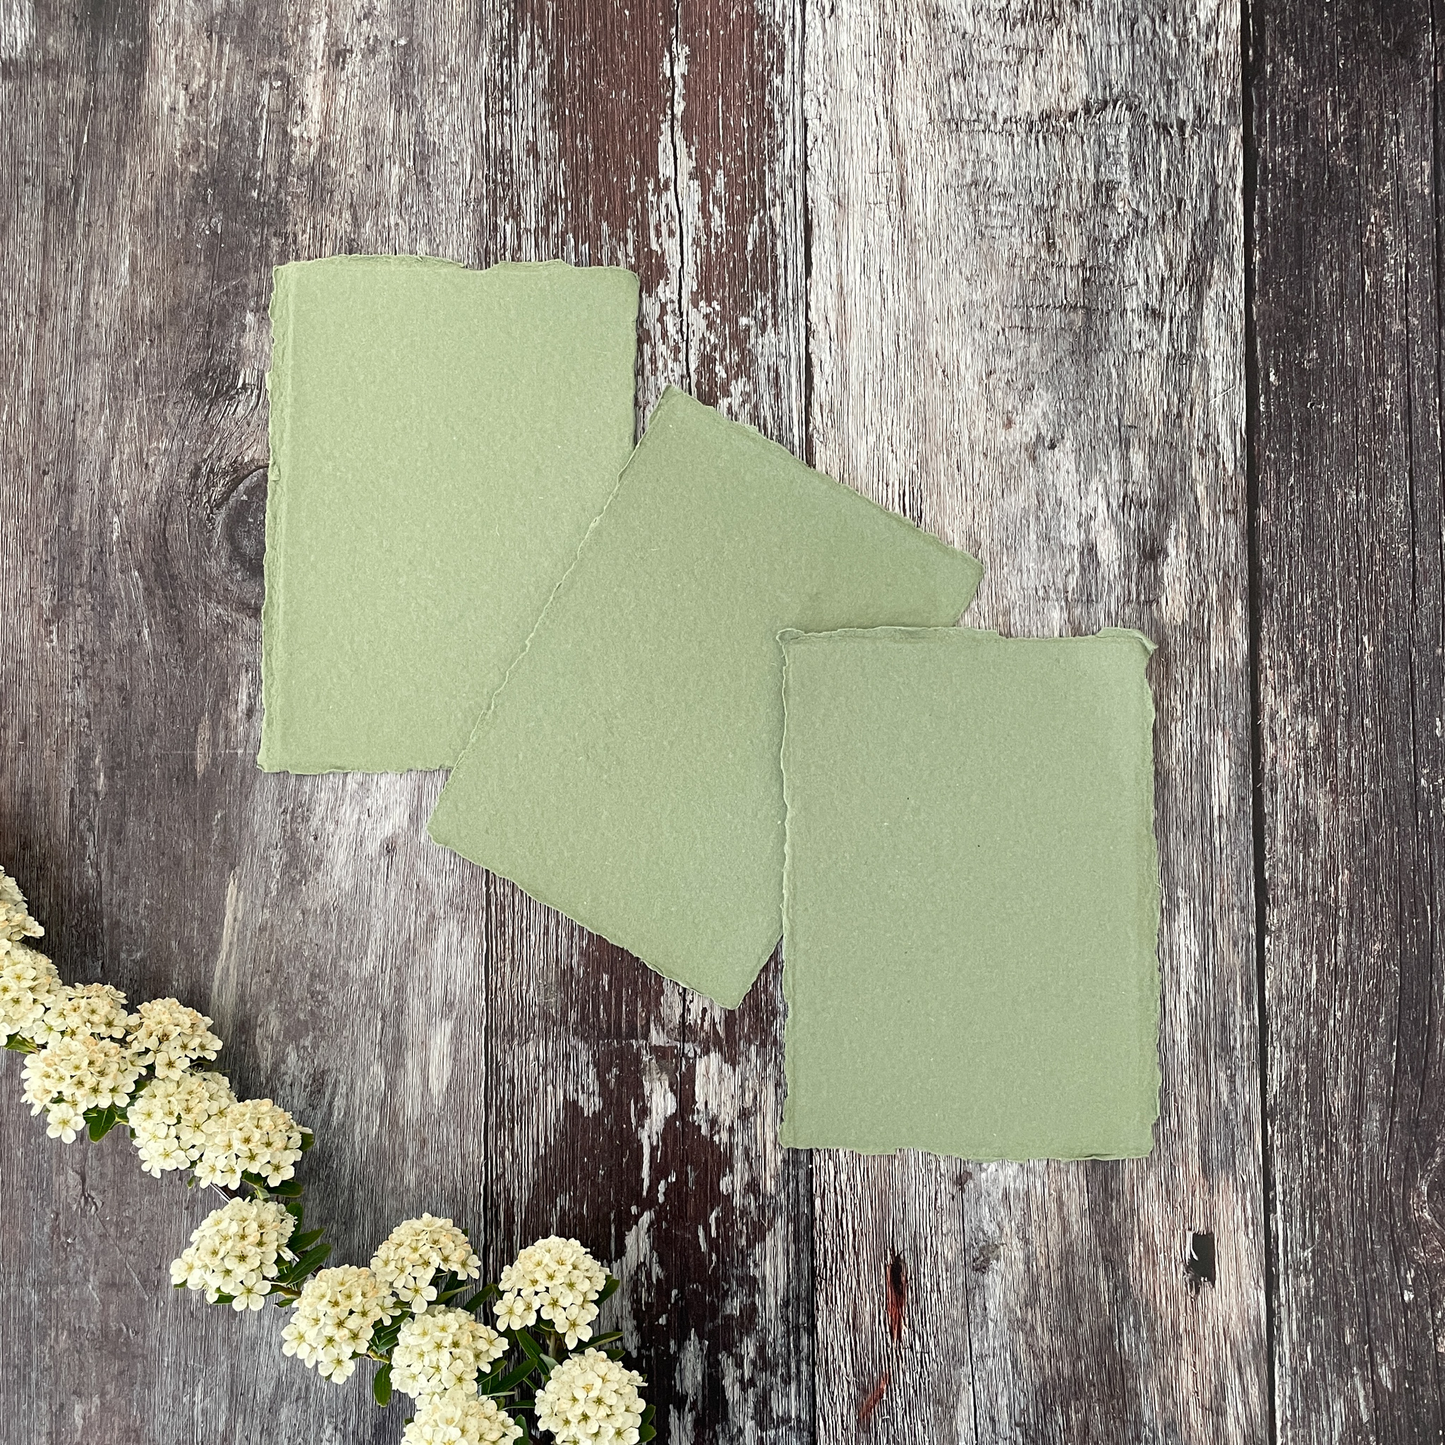 Handmade recycled paper with deckled edges.  Sage green recycled cotton rag paper.  Perfect paper for calligraphy and watercolour invitations.  Great to make wedding invitations.  By The Natural Paper Company